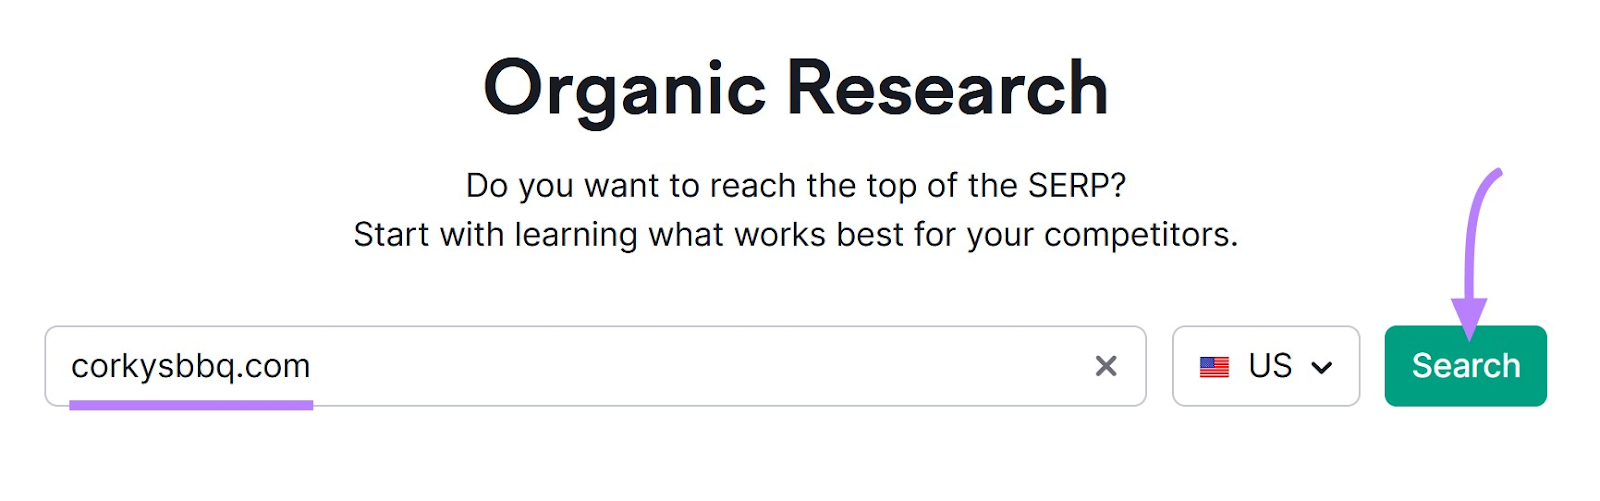 searching for "corkysbbq.com" in Organic Research tool